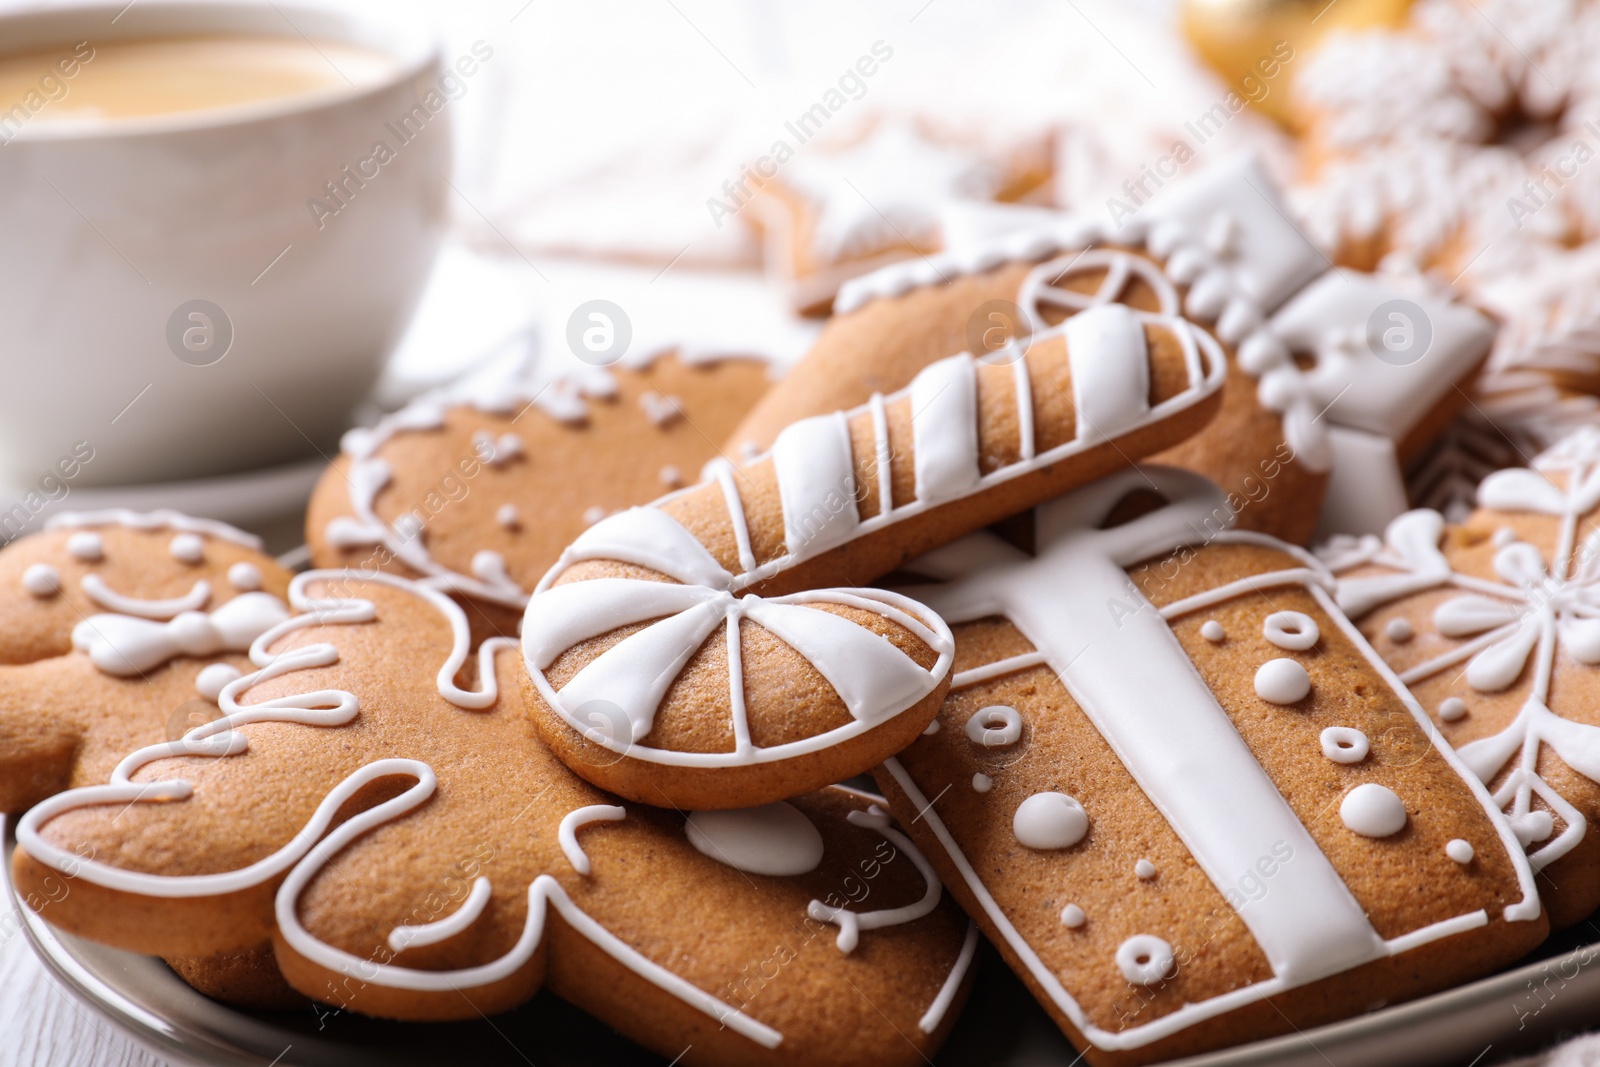 Photo of Delicious Christmas cookies on plate, closeup view